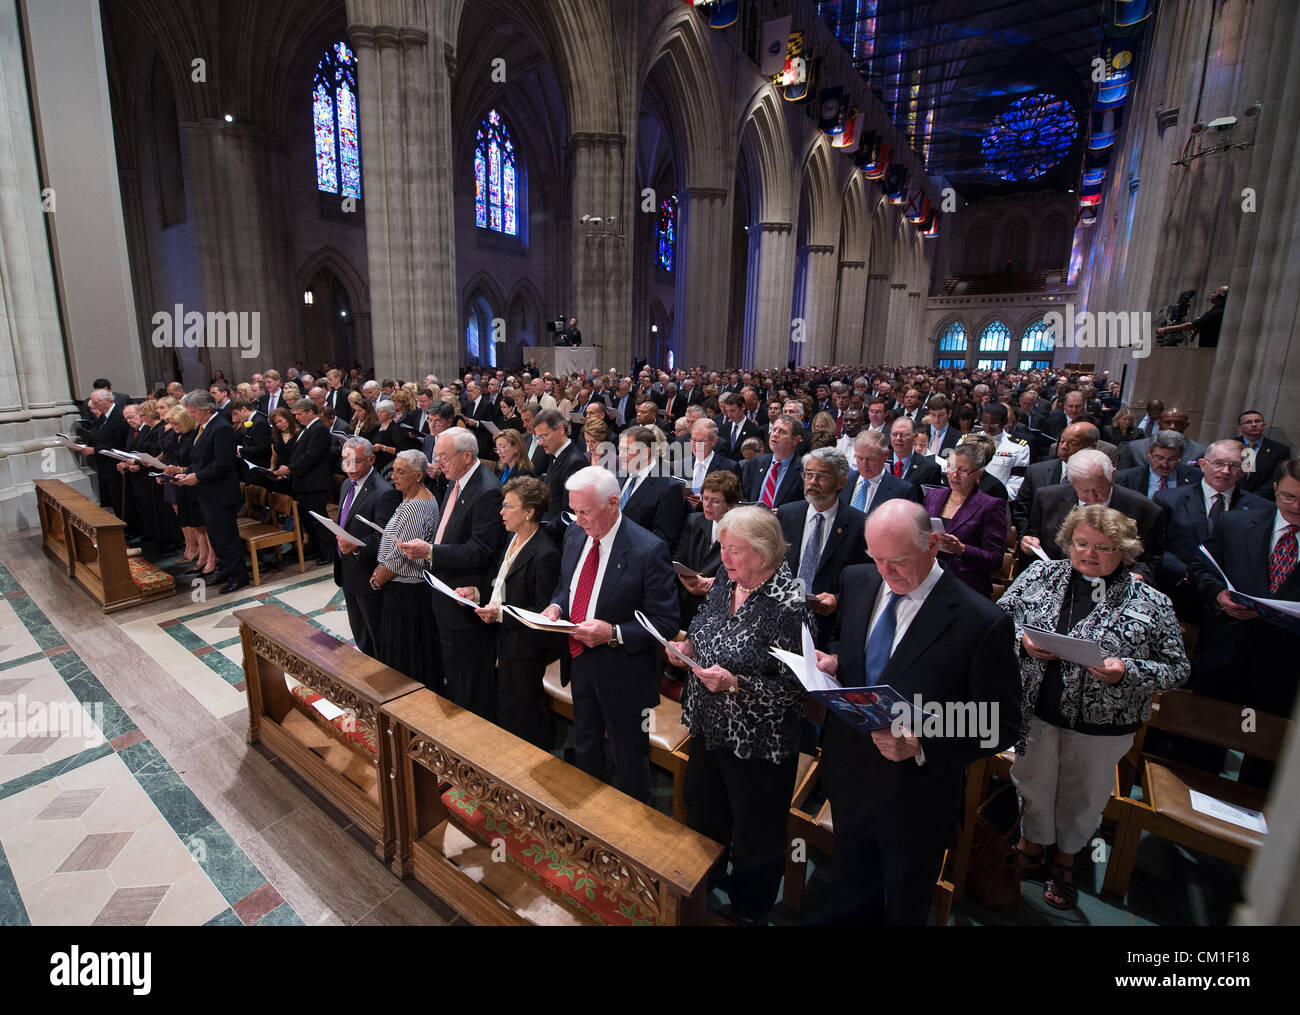 Attendees to the memorial service for astronaut Neil Armstrong sing a hymnal during a memorial service celebrating his life September 13, 2012 at the National Cathedral in Washington, DC. Armstrong, the first man to walk on the moon during the 1969 Apollo 11 mission, died August 25. He was 82. Stock Photo